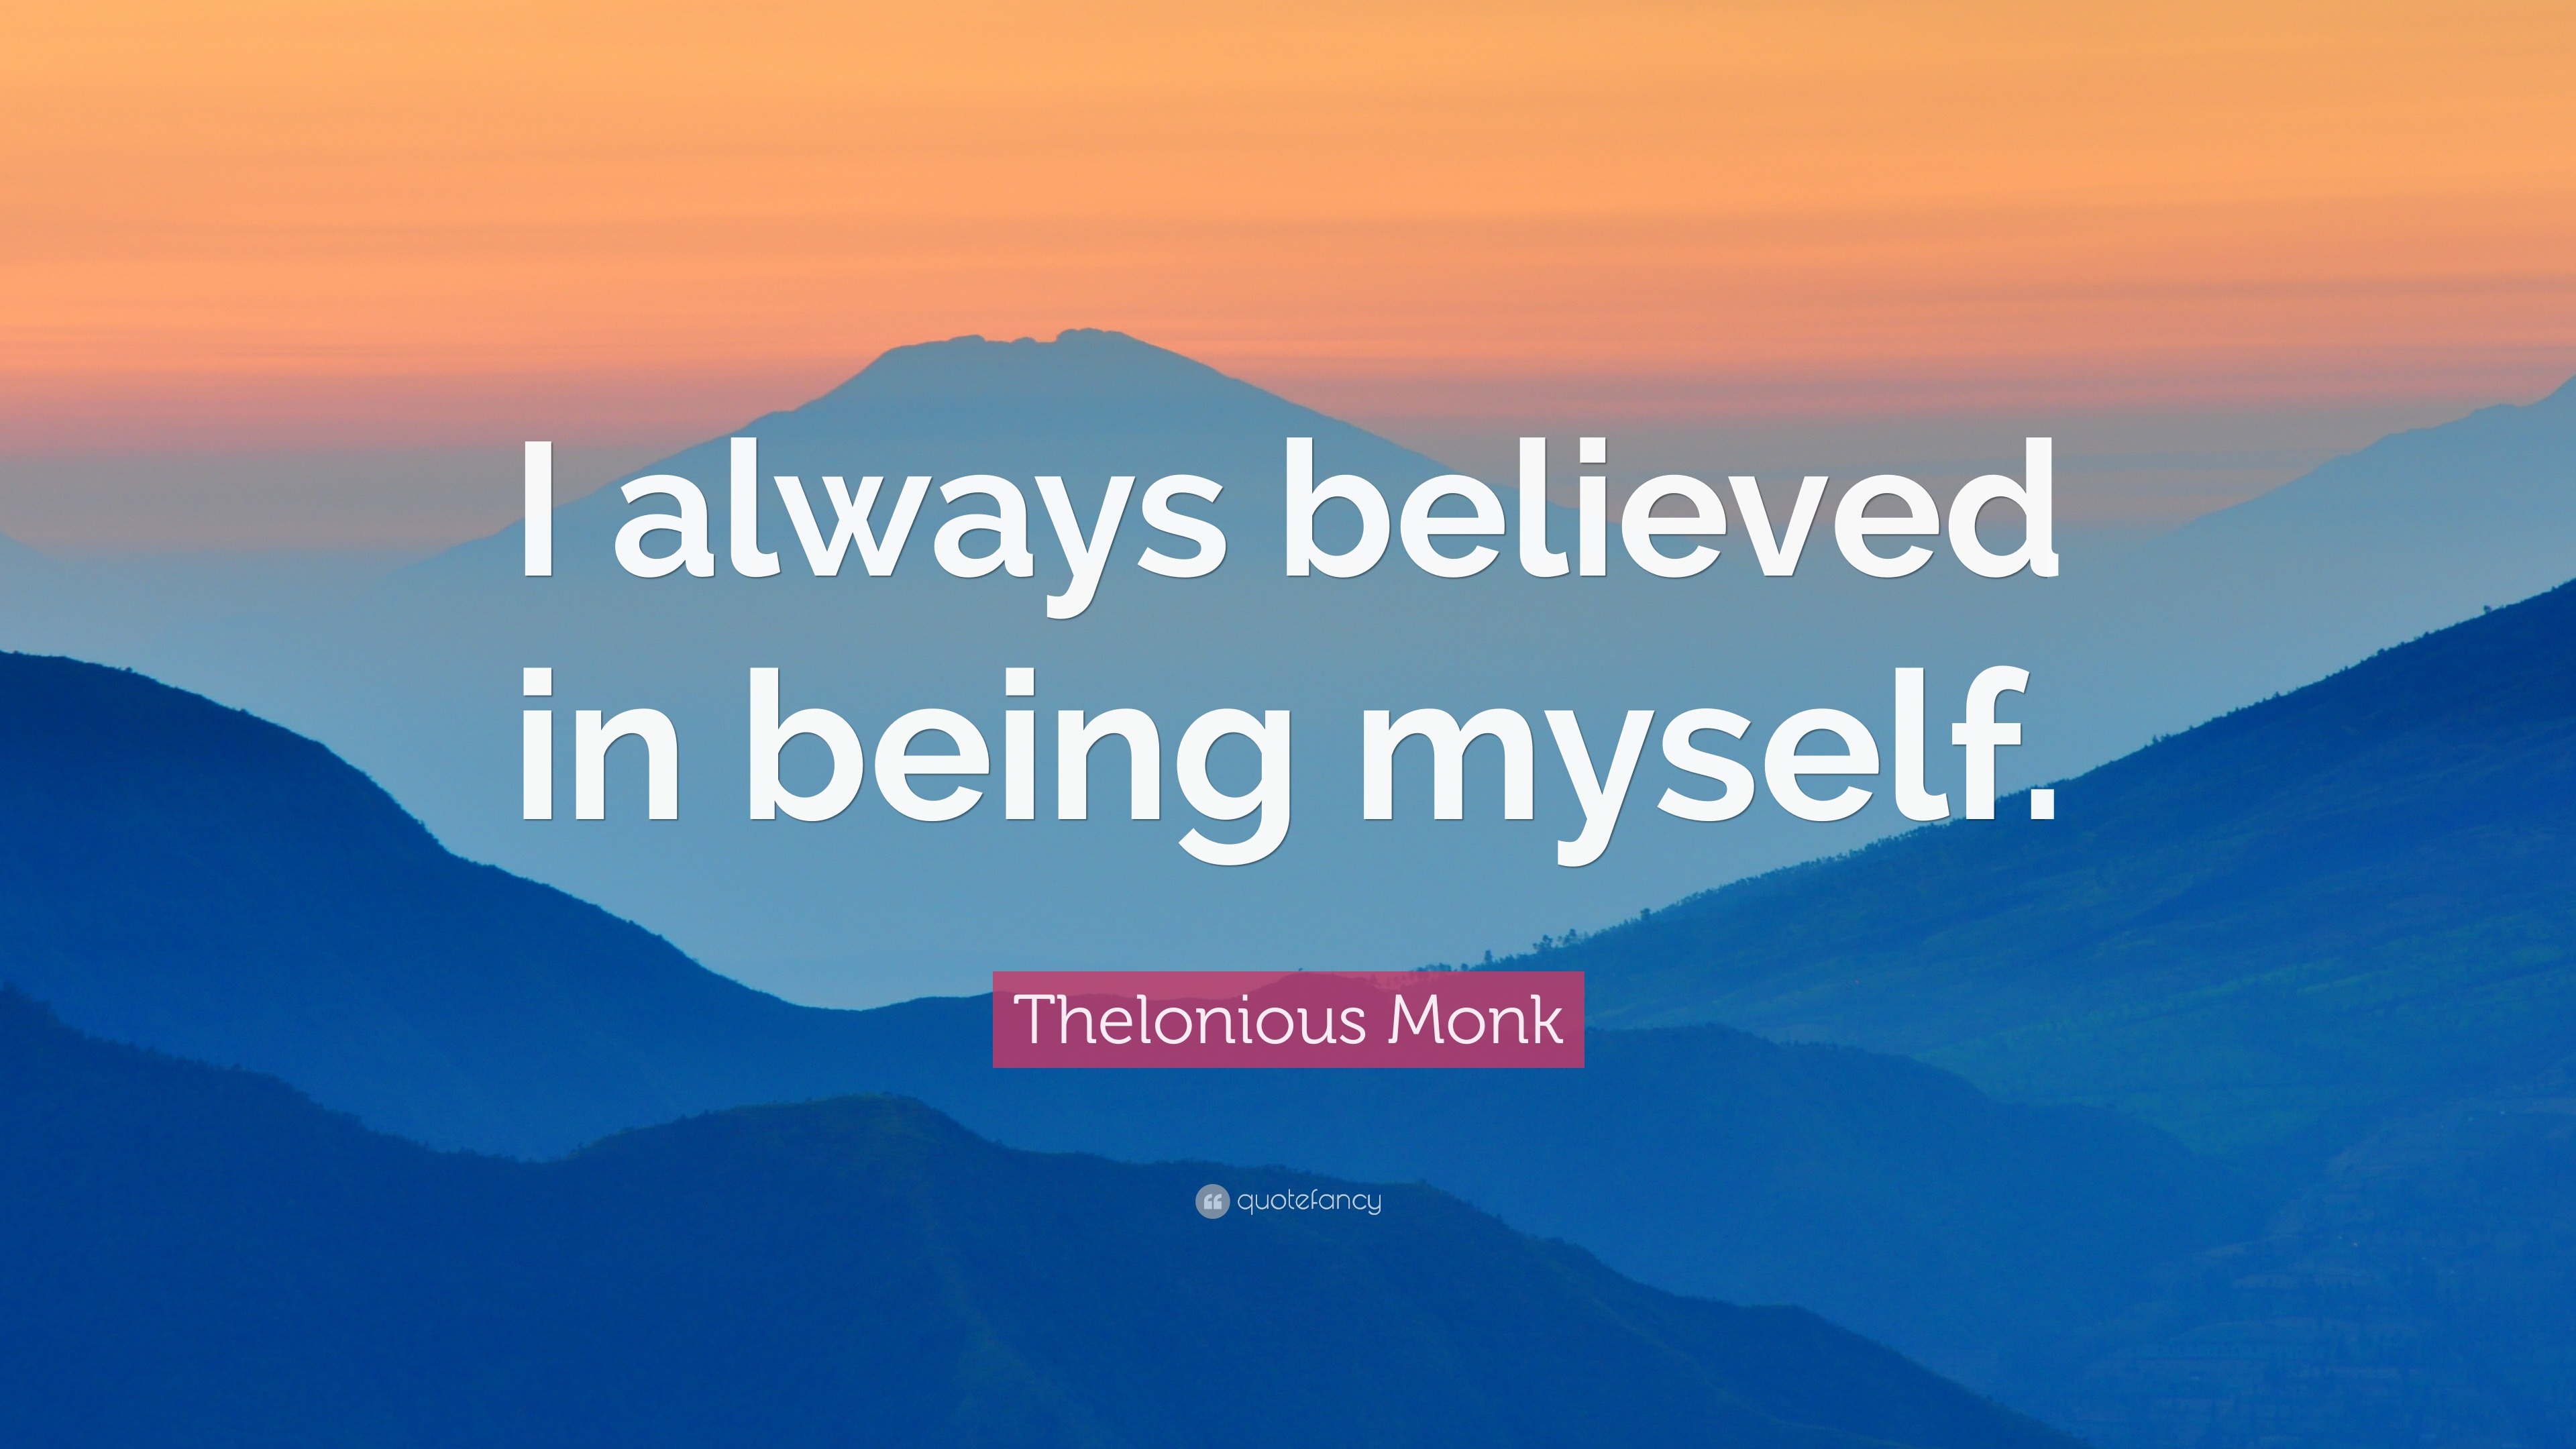 Thelonious Monk Quote: "I always believed in being myself ...